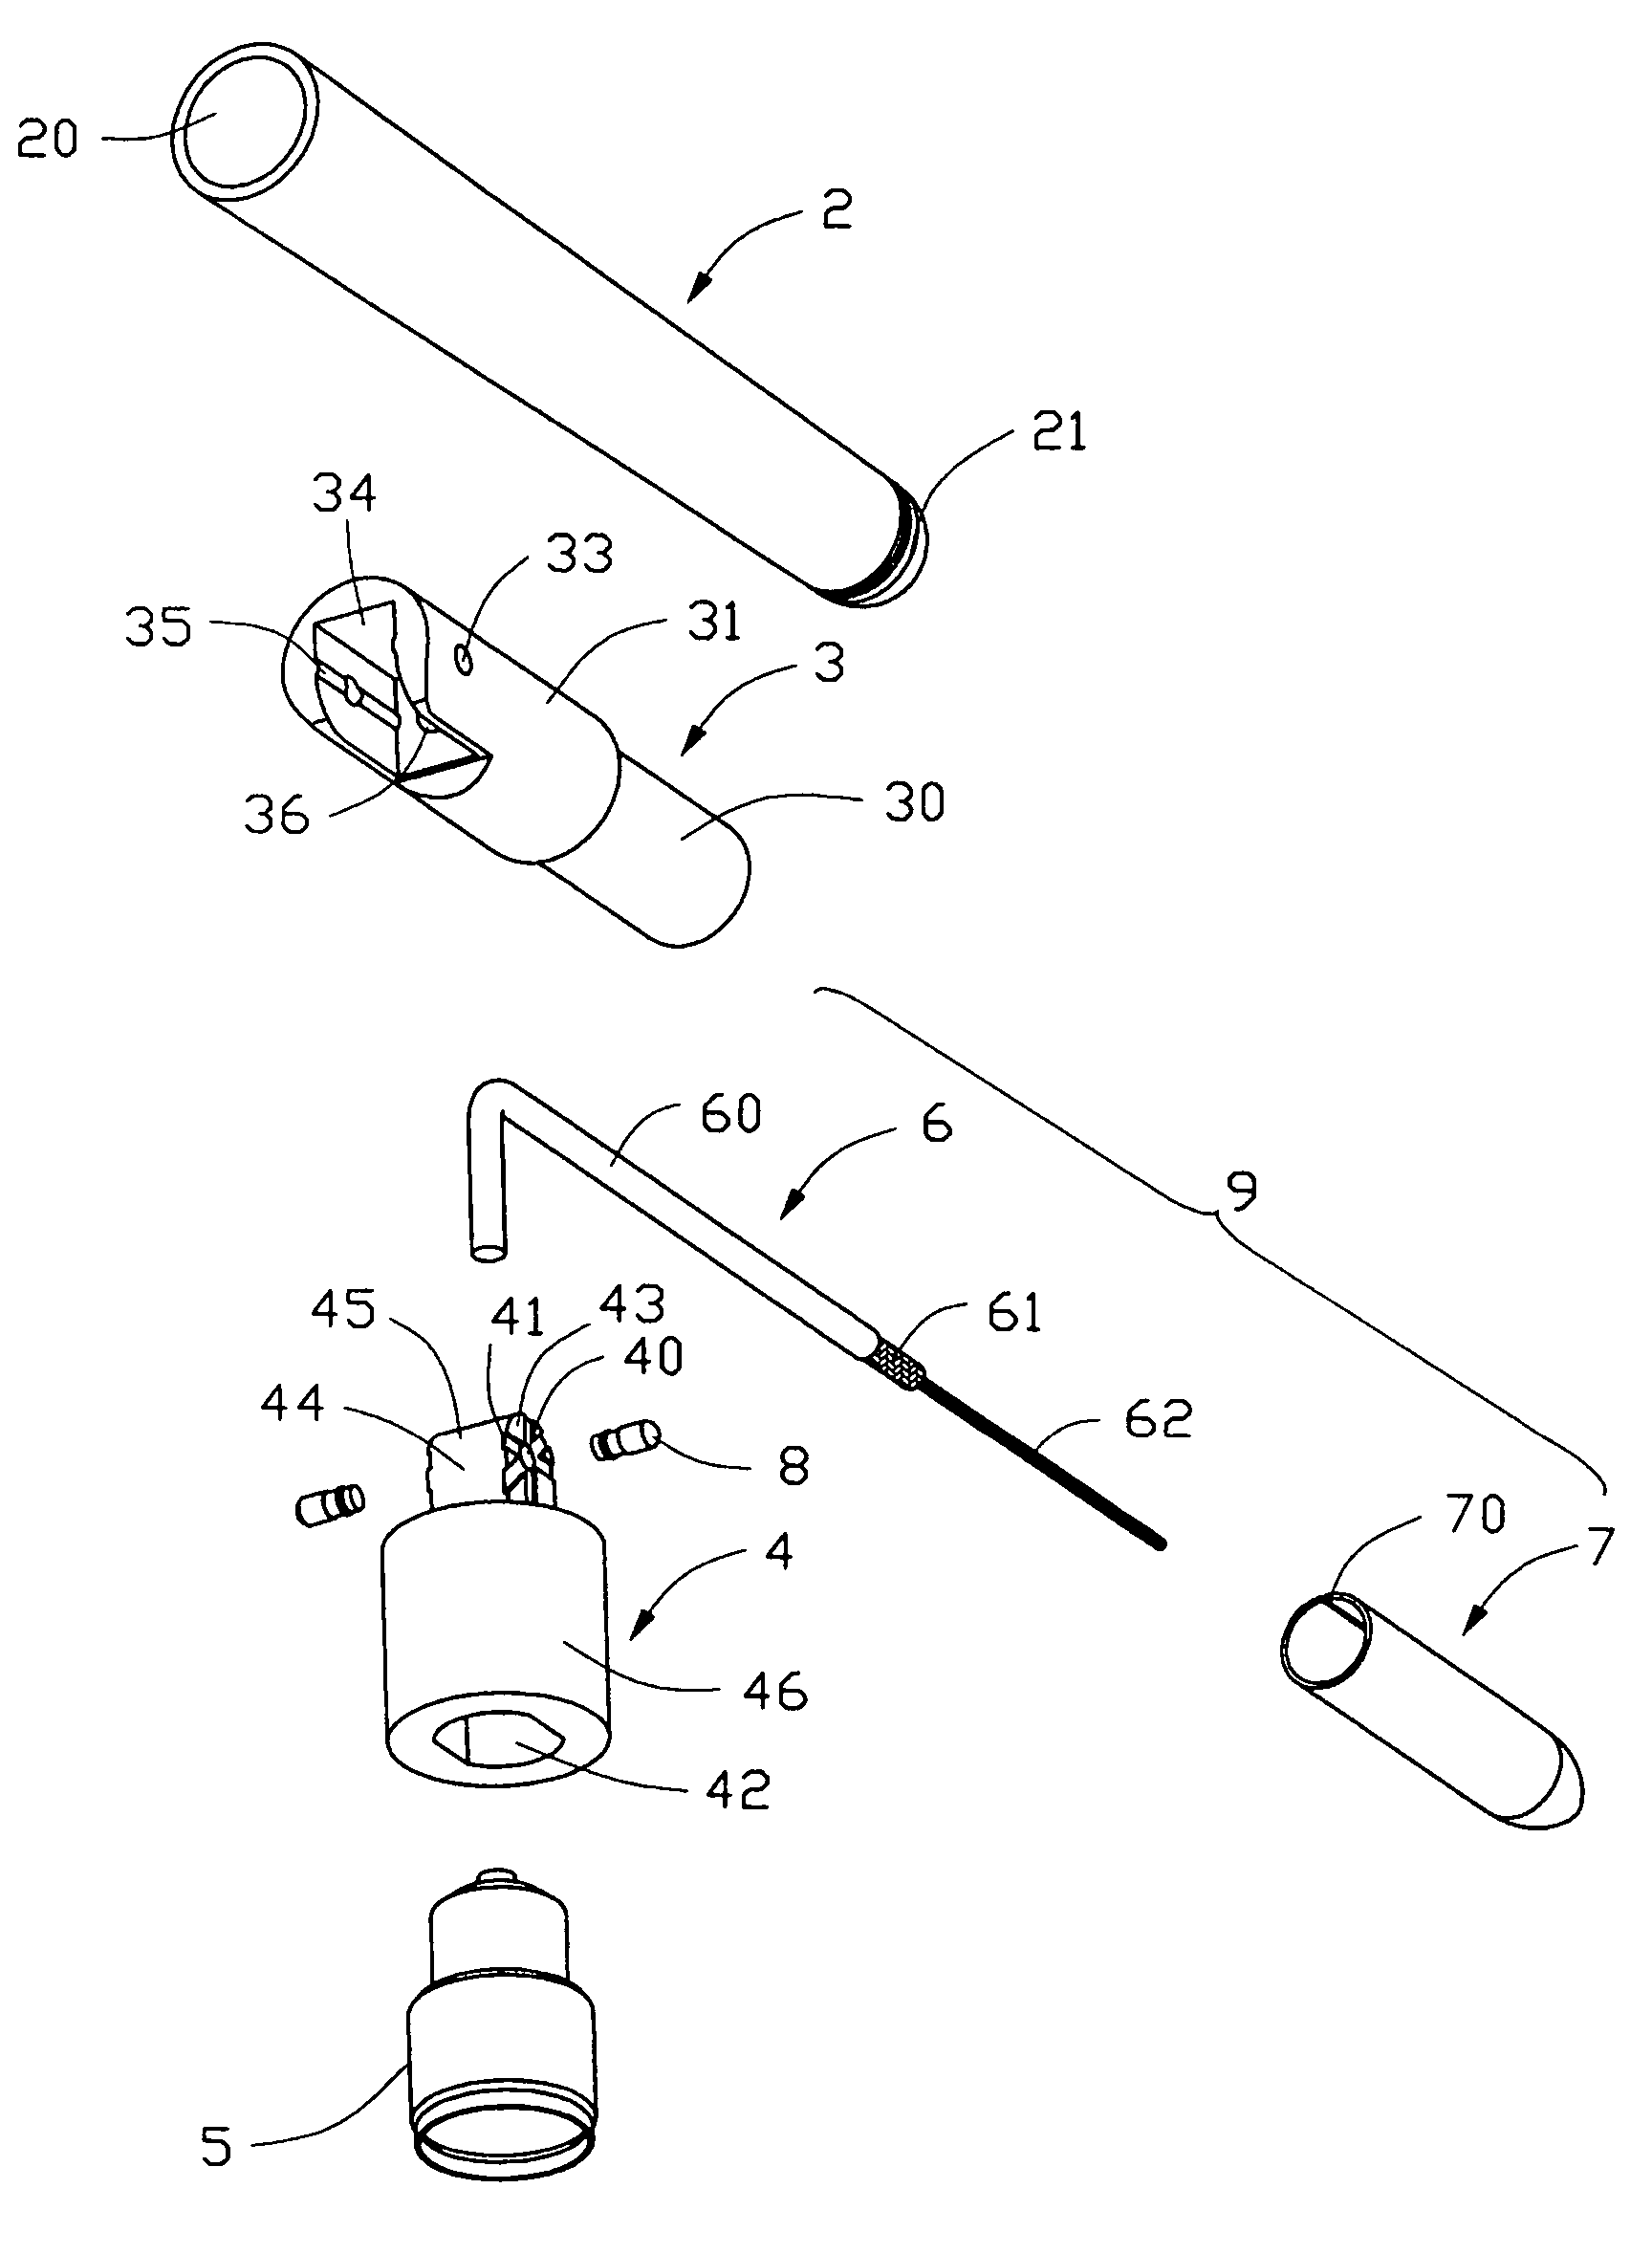 Cable antenna assembly having slots in grounding sleeve